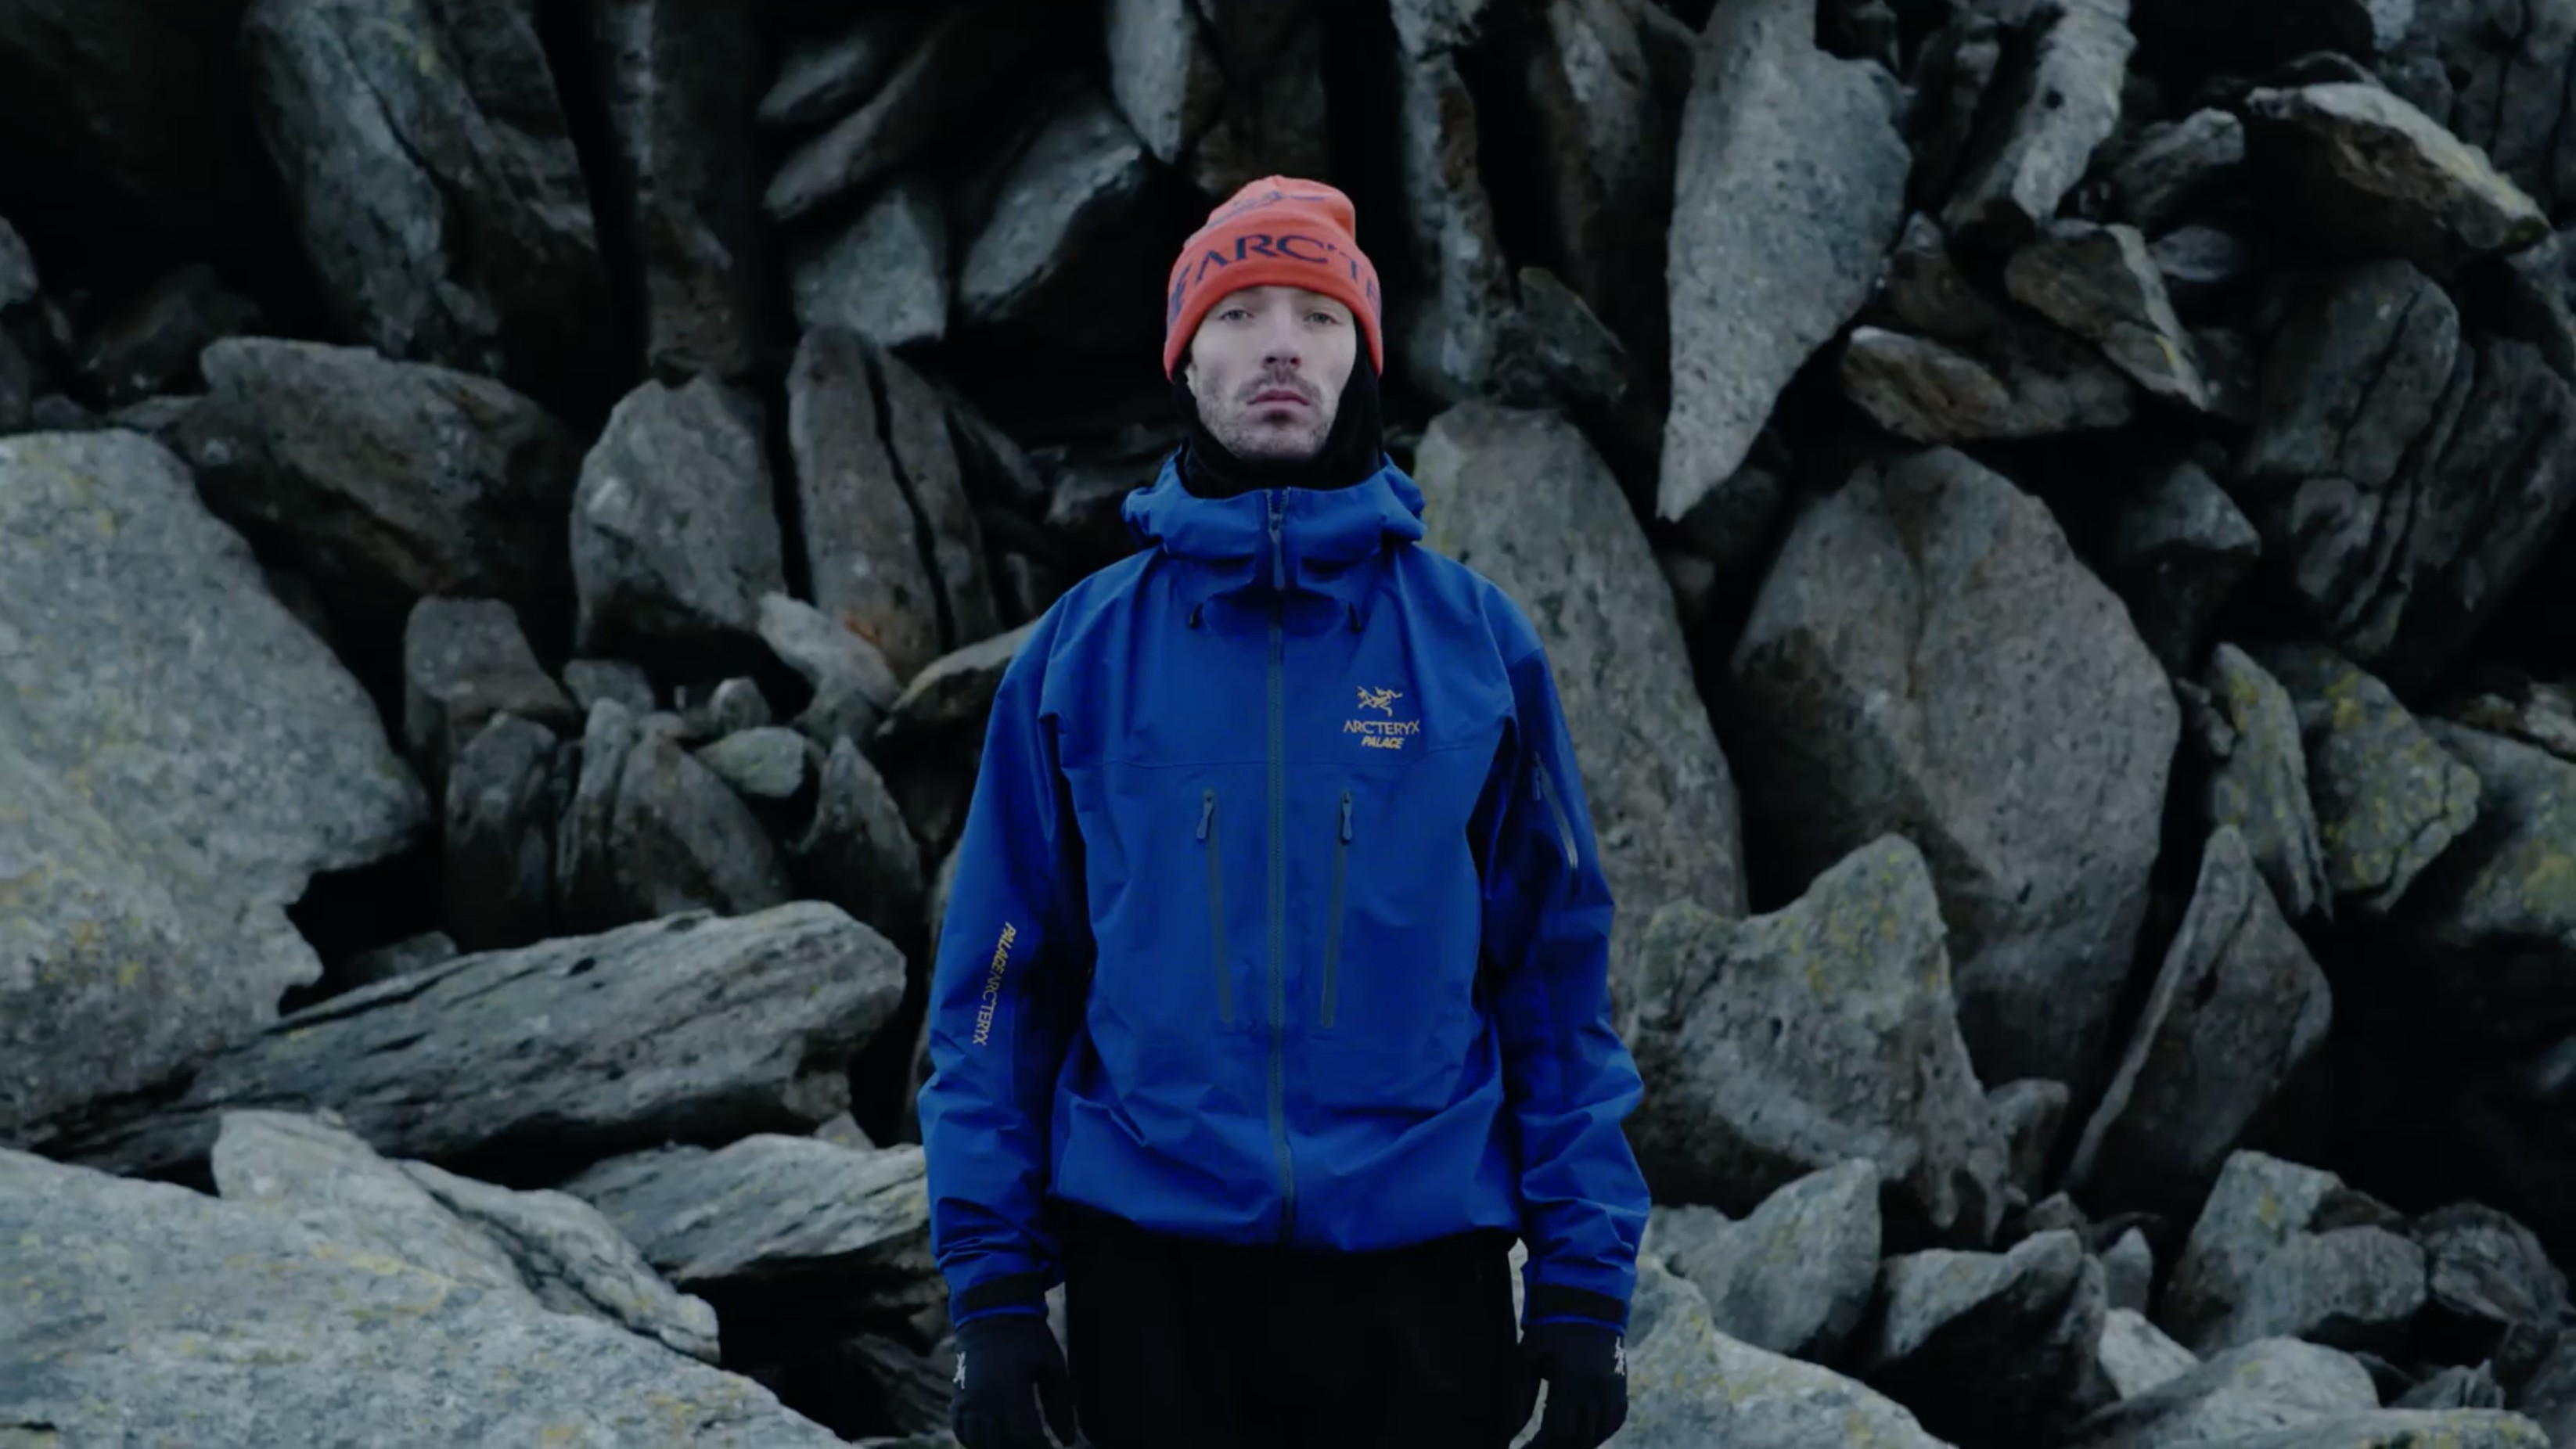 Palace's collab with Arc'teryx celebrates the great outdoors